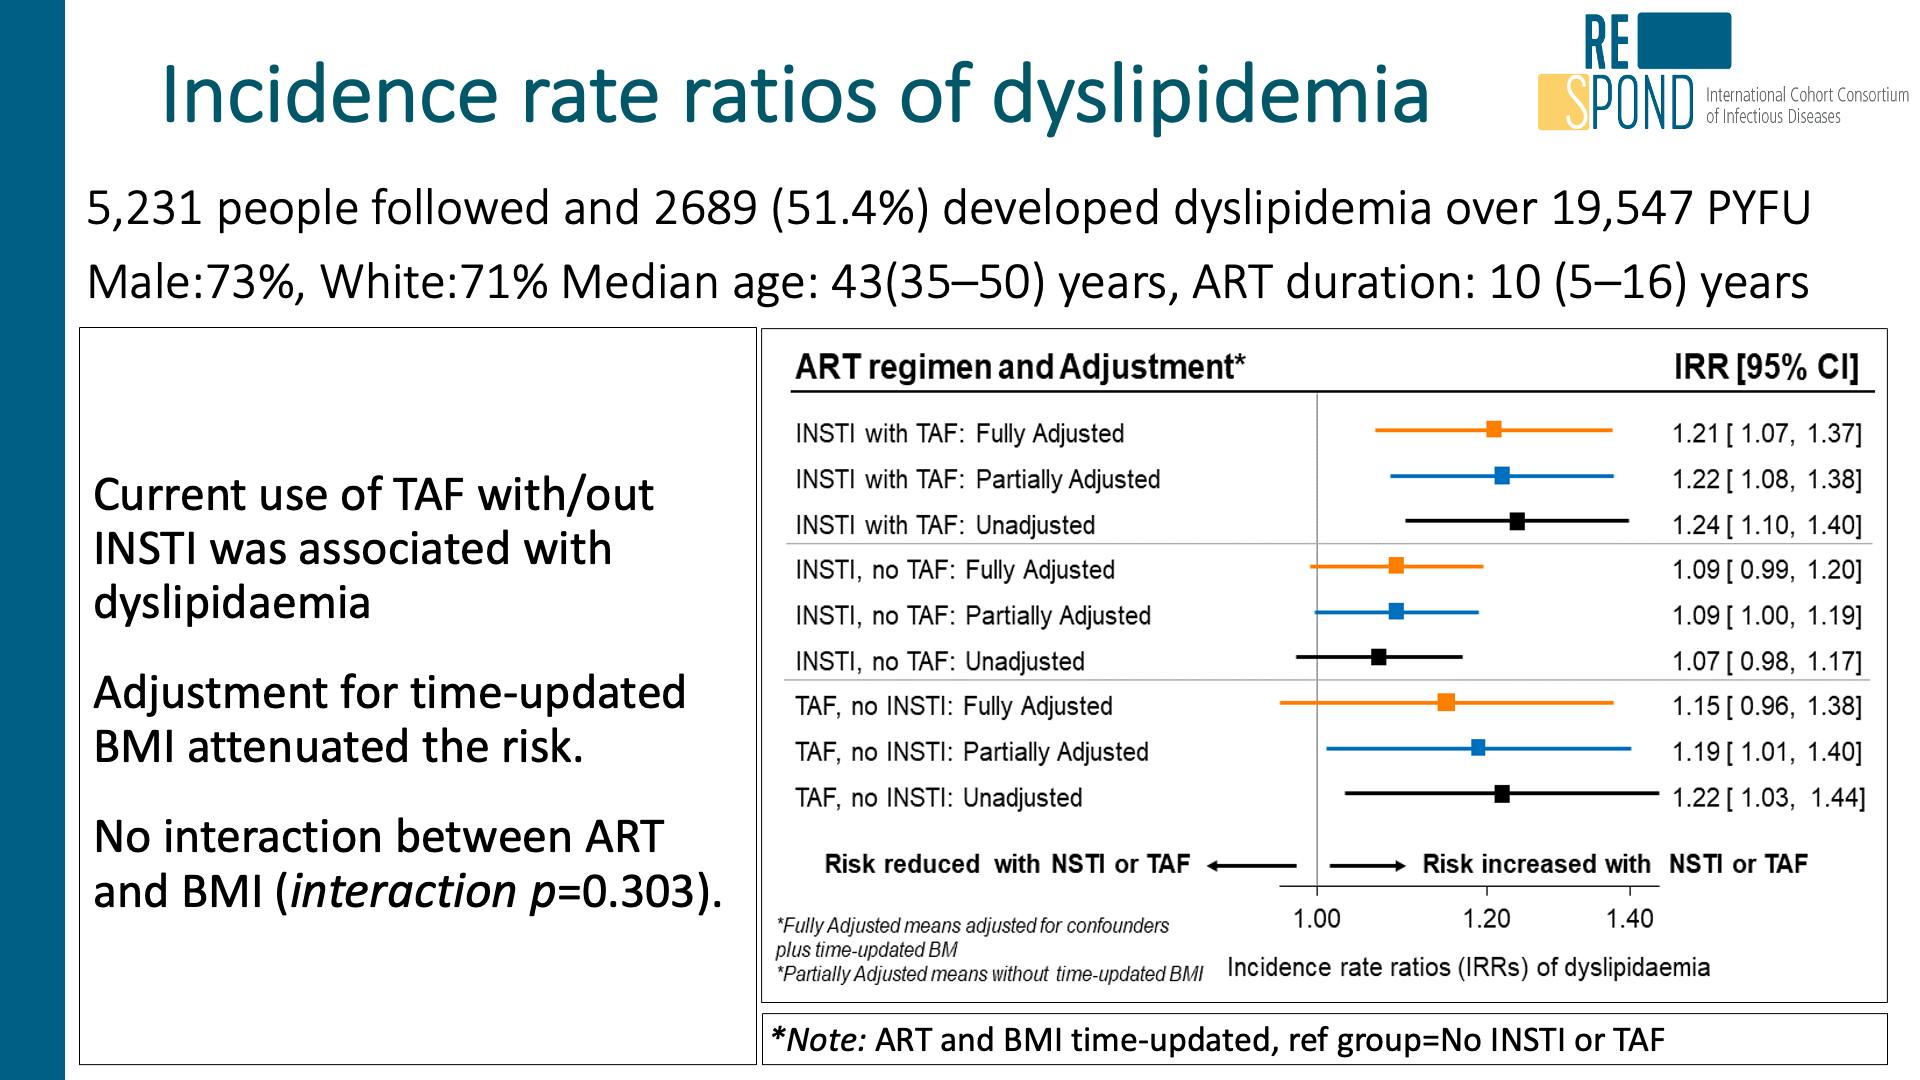 Incidence rate ratios of dyslipidemia